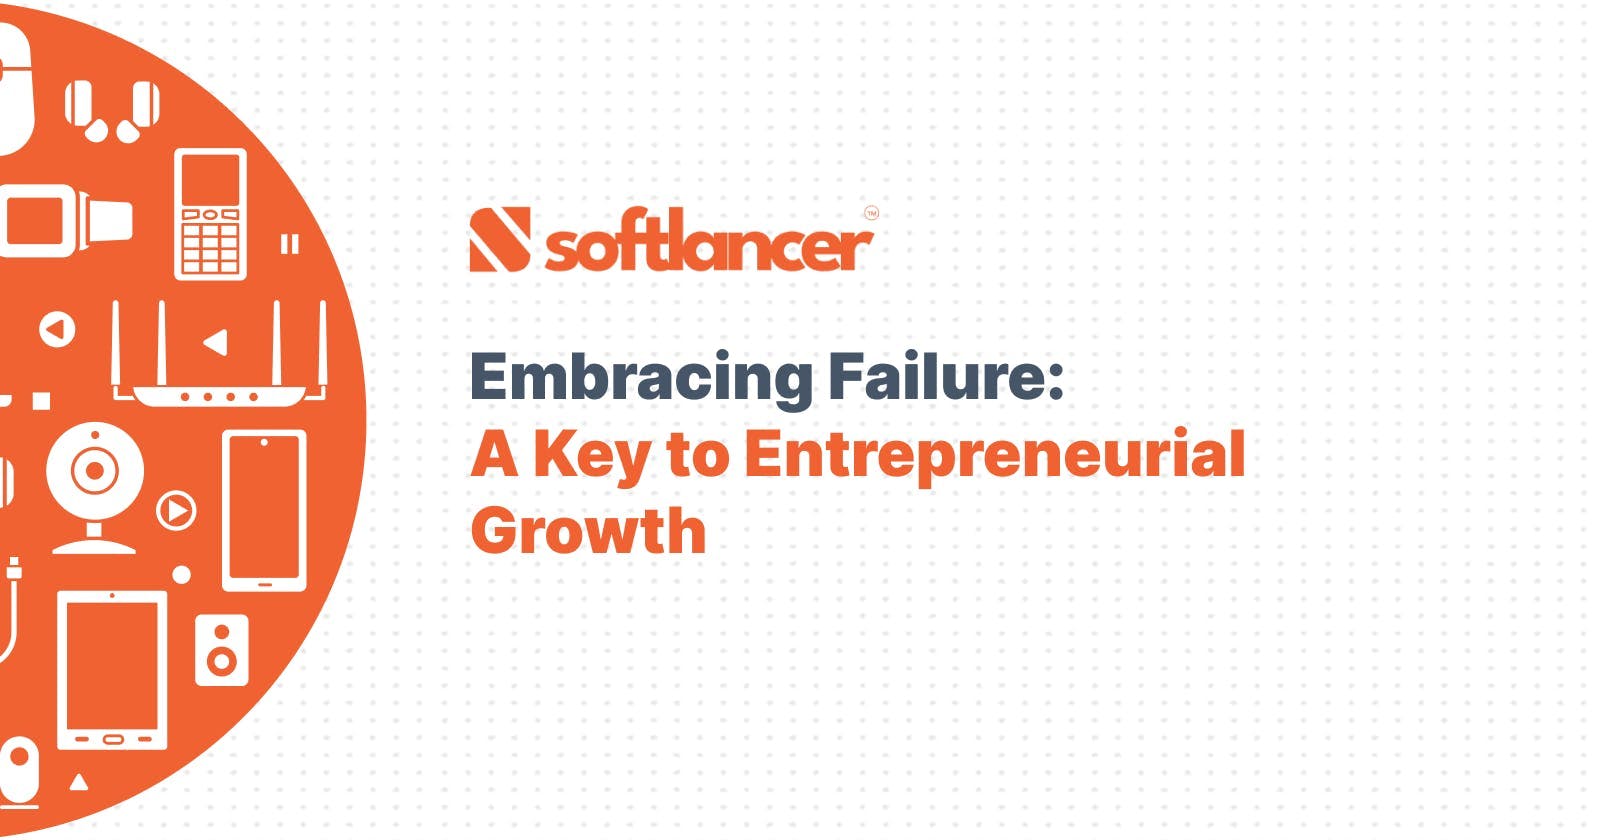 Embracing Failure: A Key to Entrepreneurial Growth